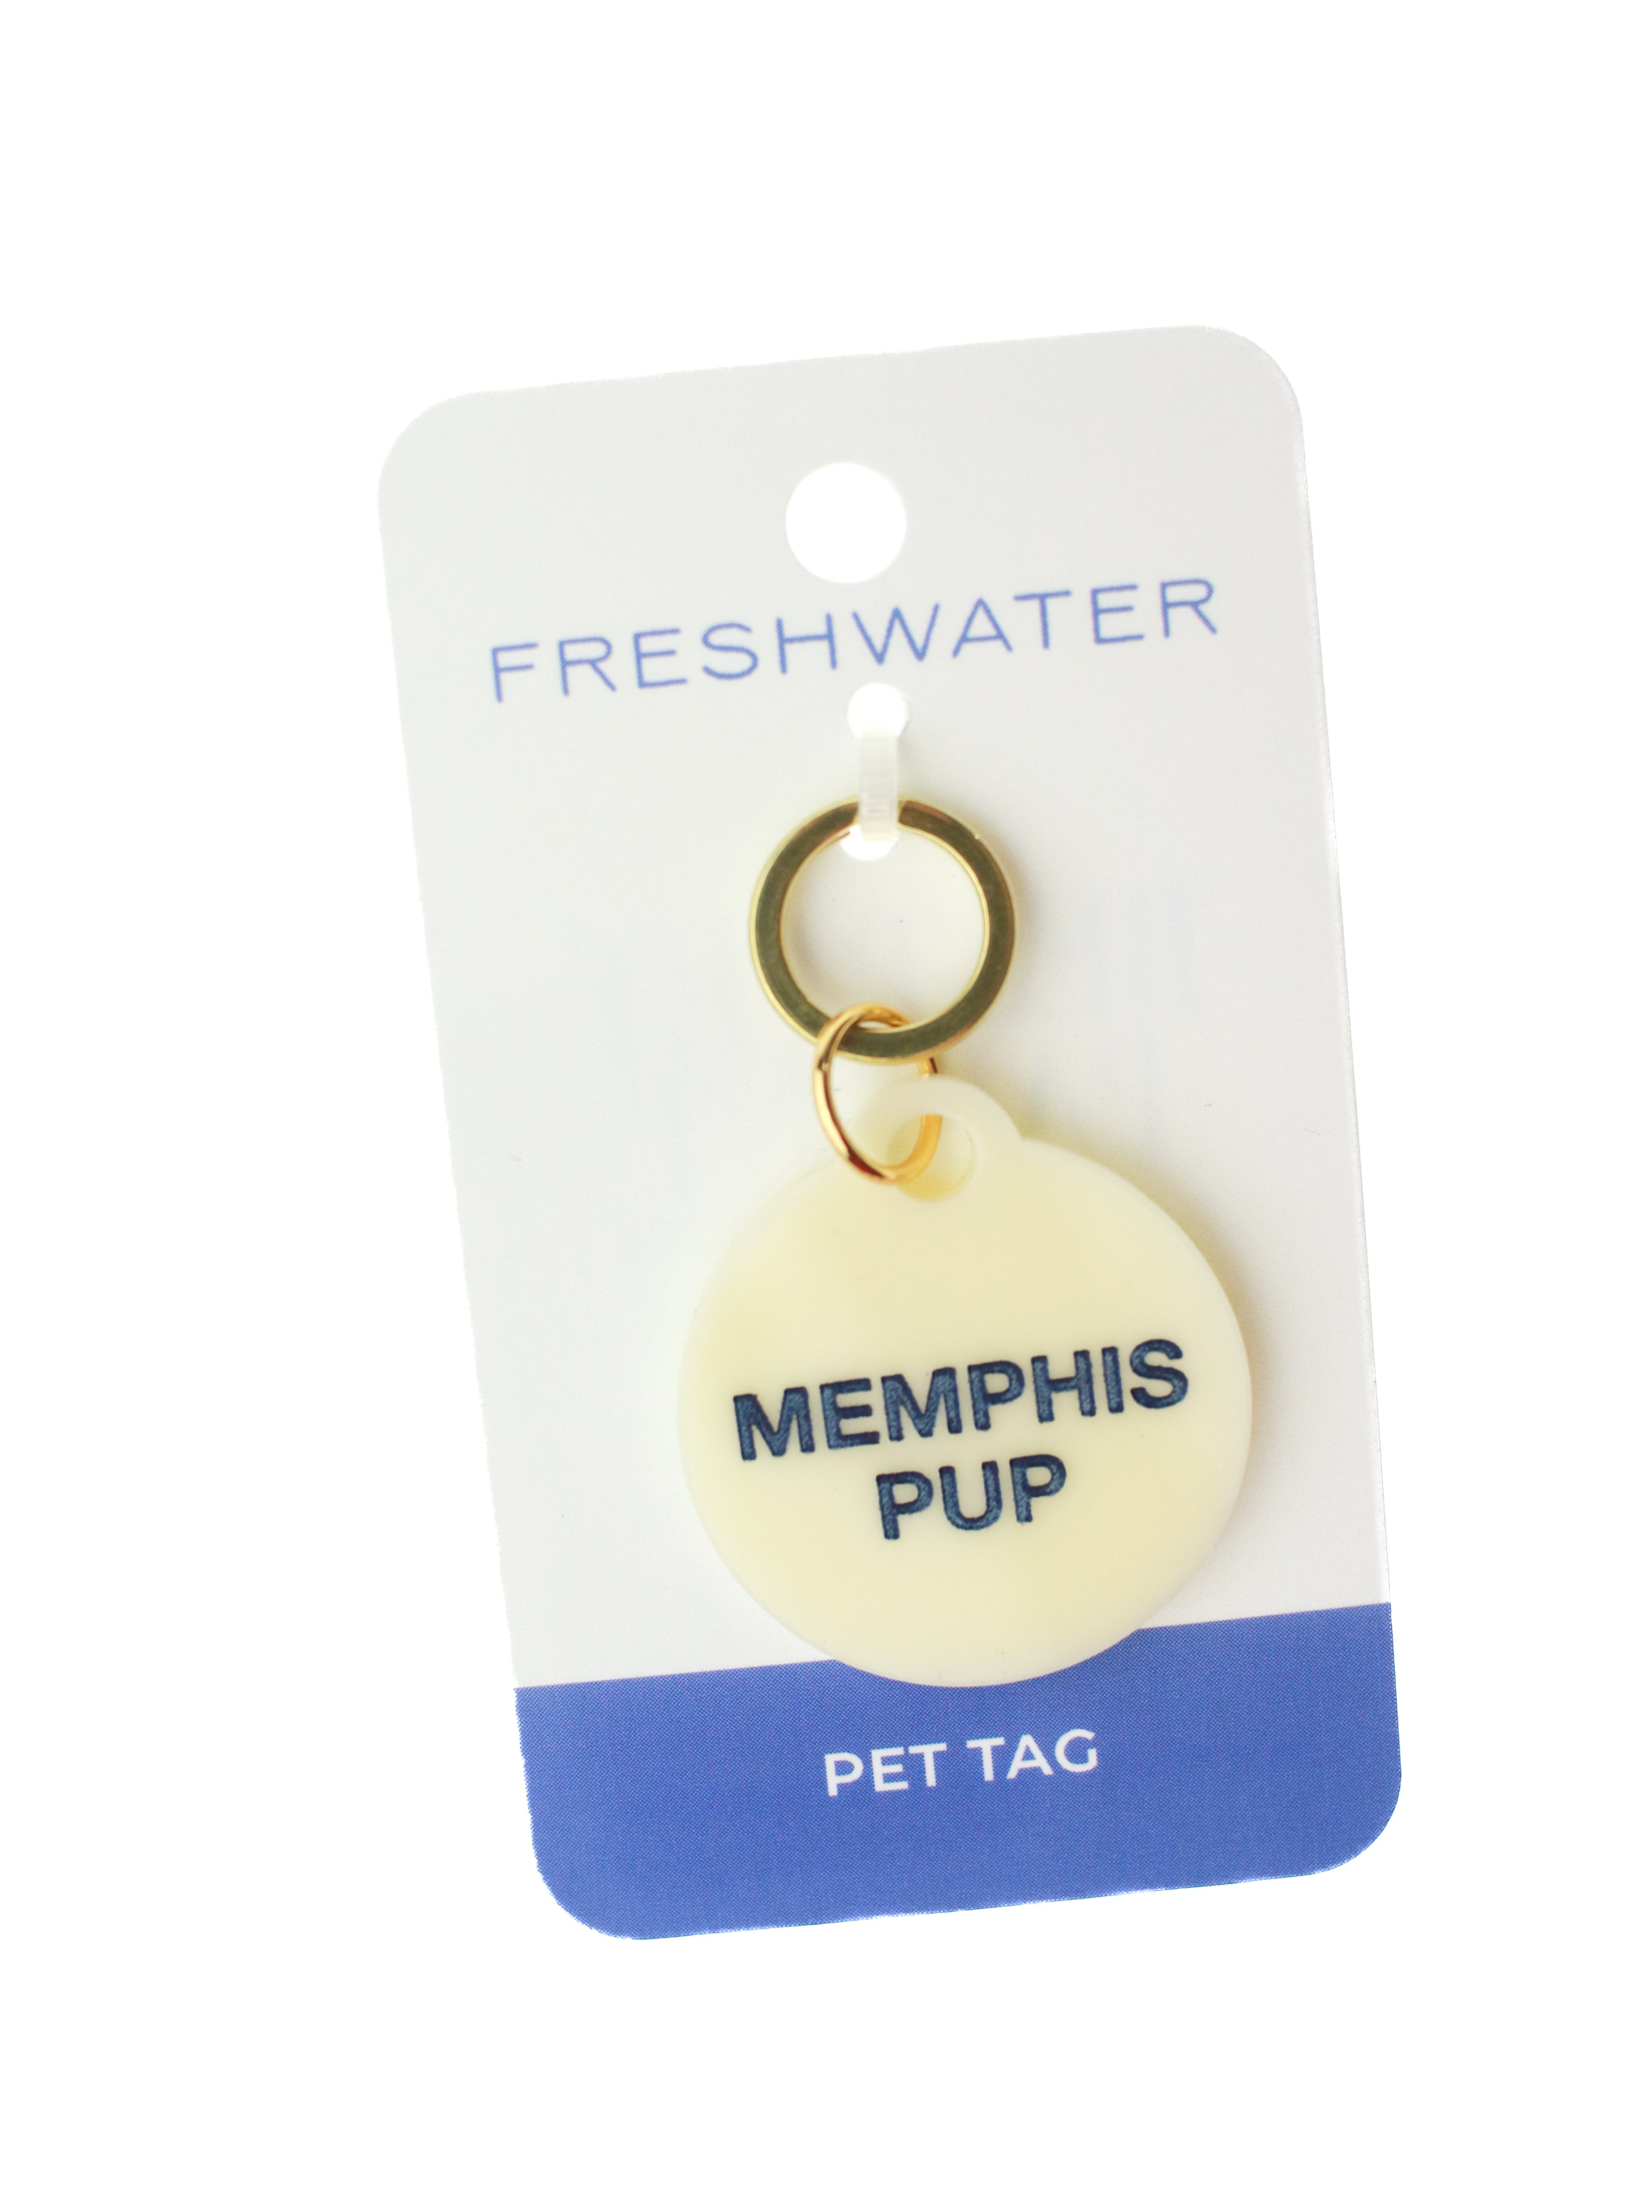 Acrylic Pet Tag by Freshwater Design Co. – Whitney Winkler Art